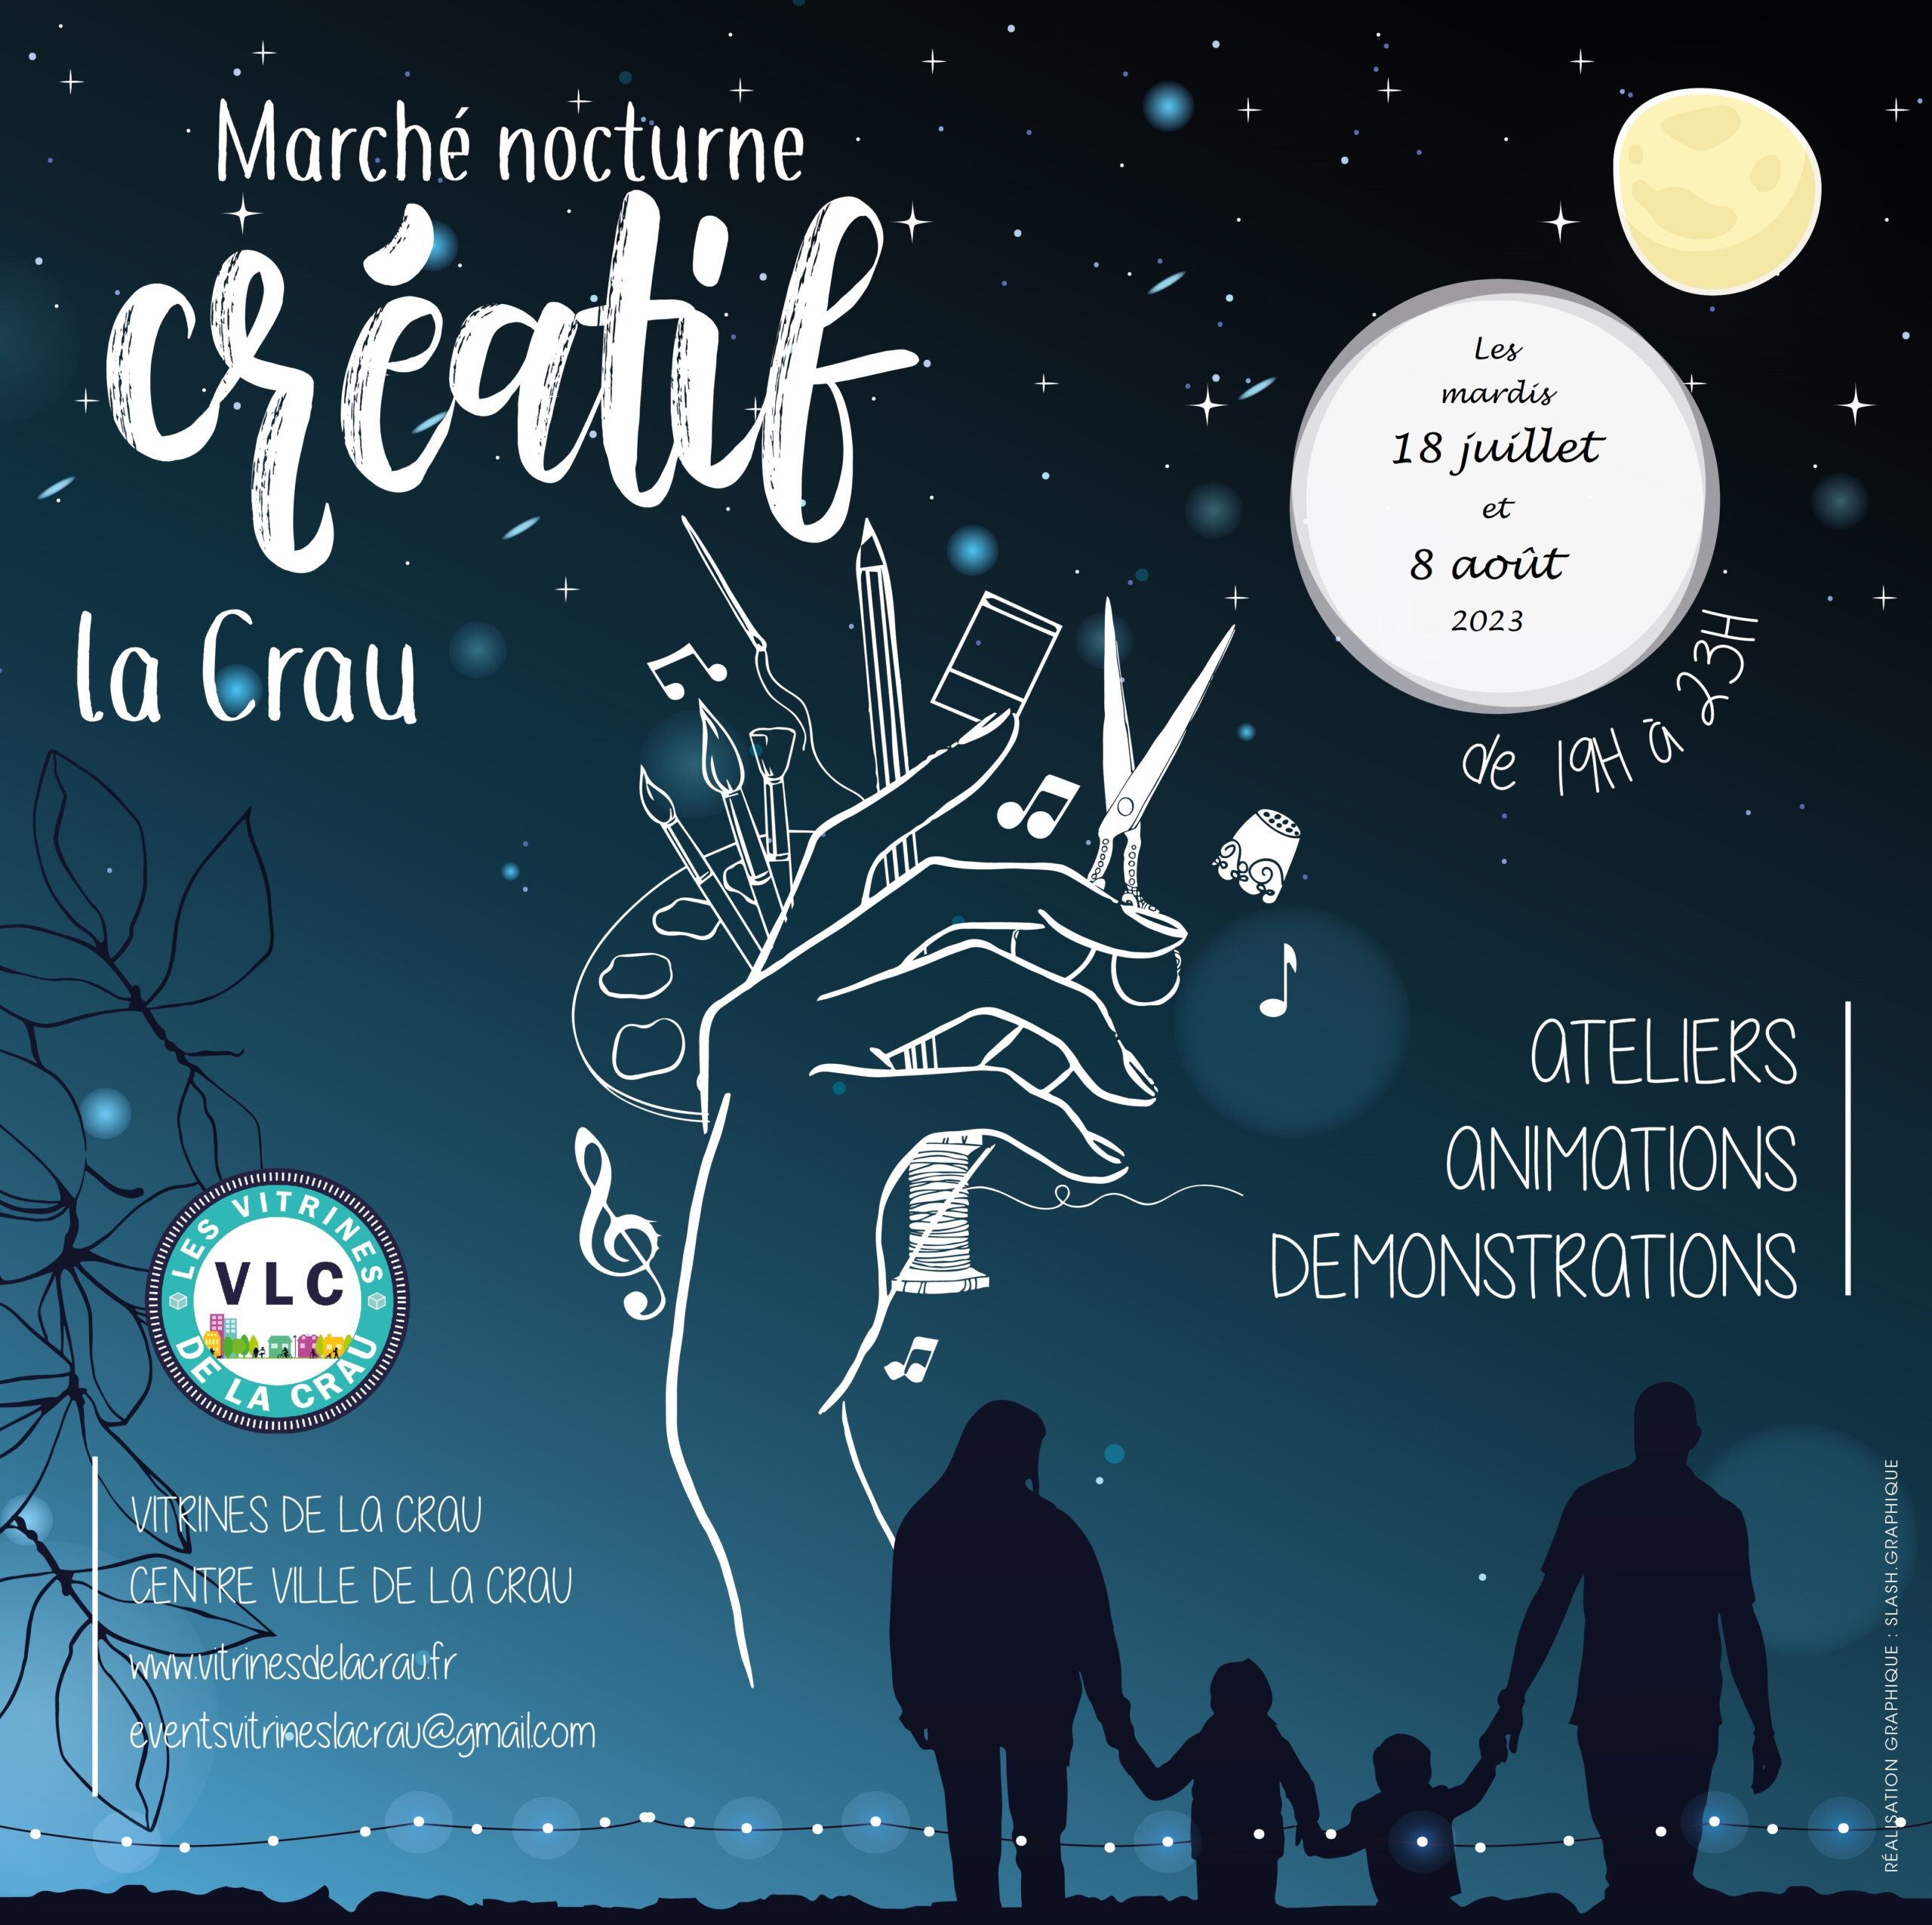 You are currently viewing Mardi 18 juillet 2023 – Marché nocturne